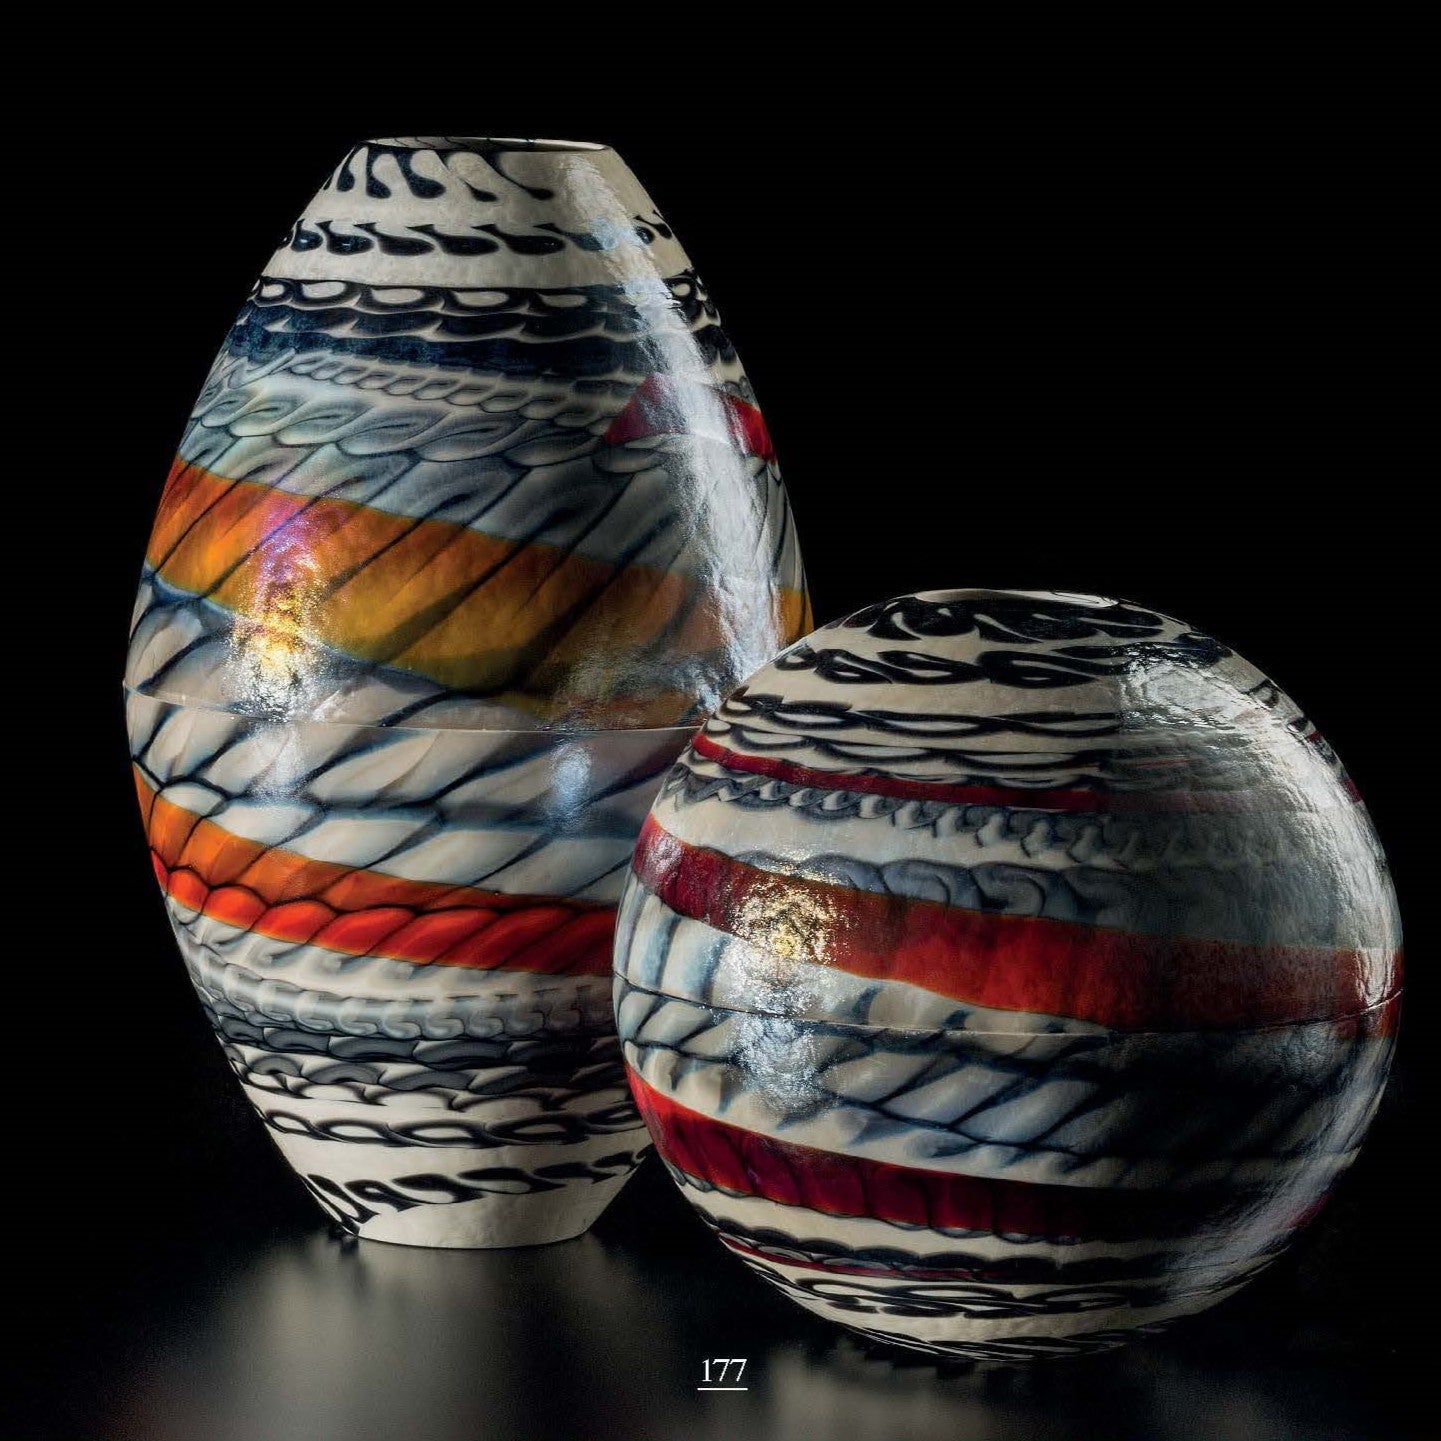 The Zaire Collection Vases